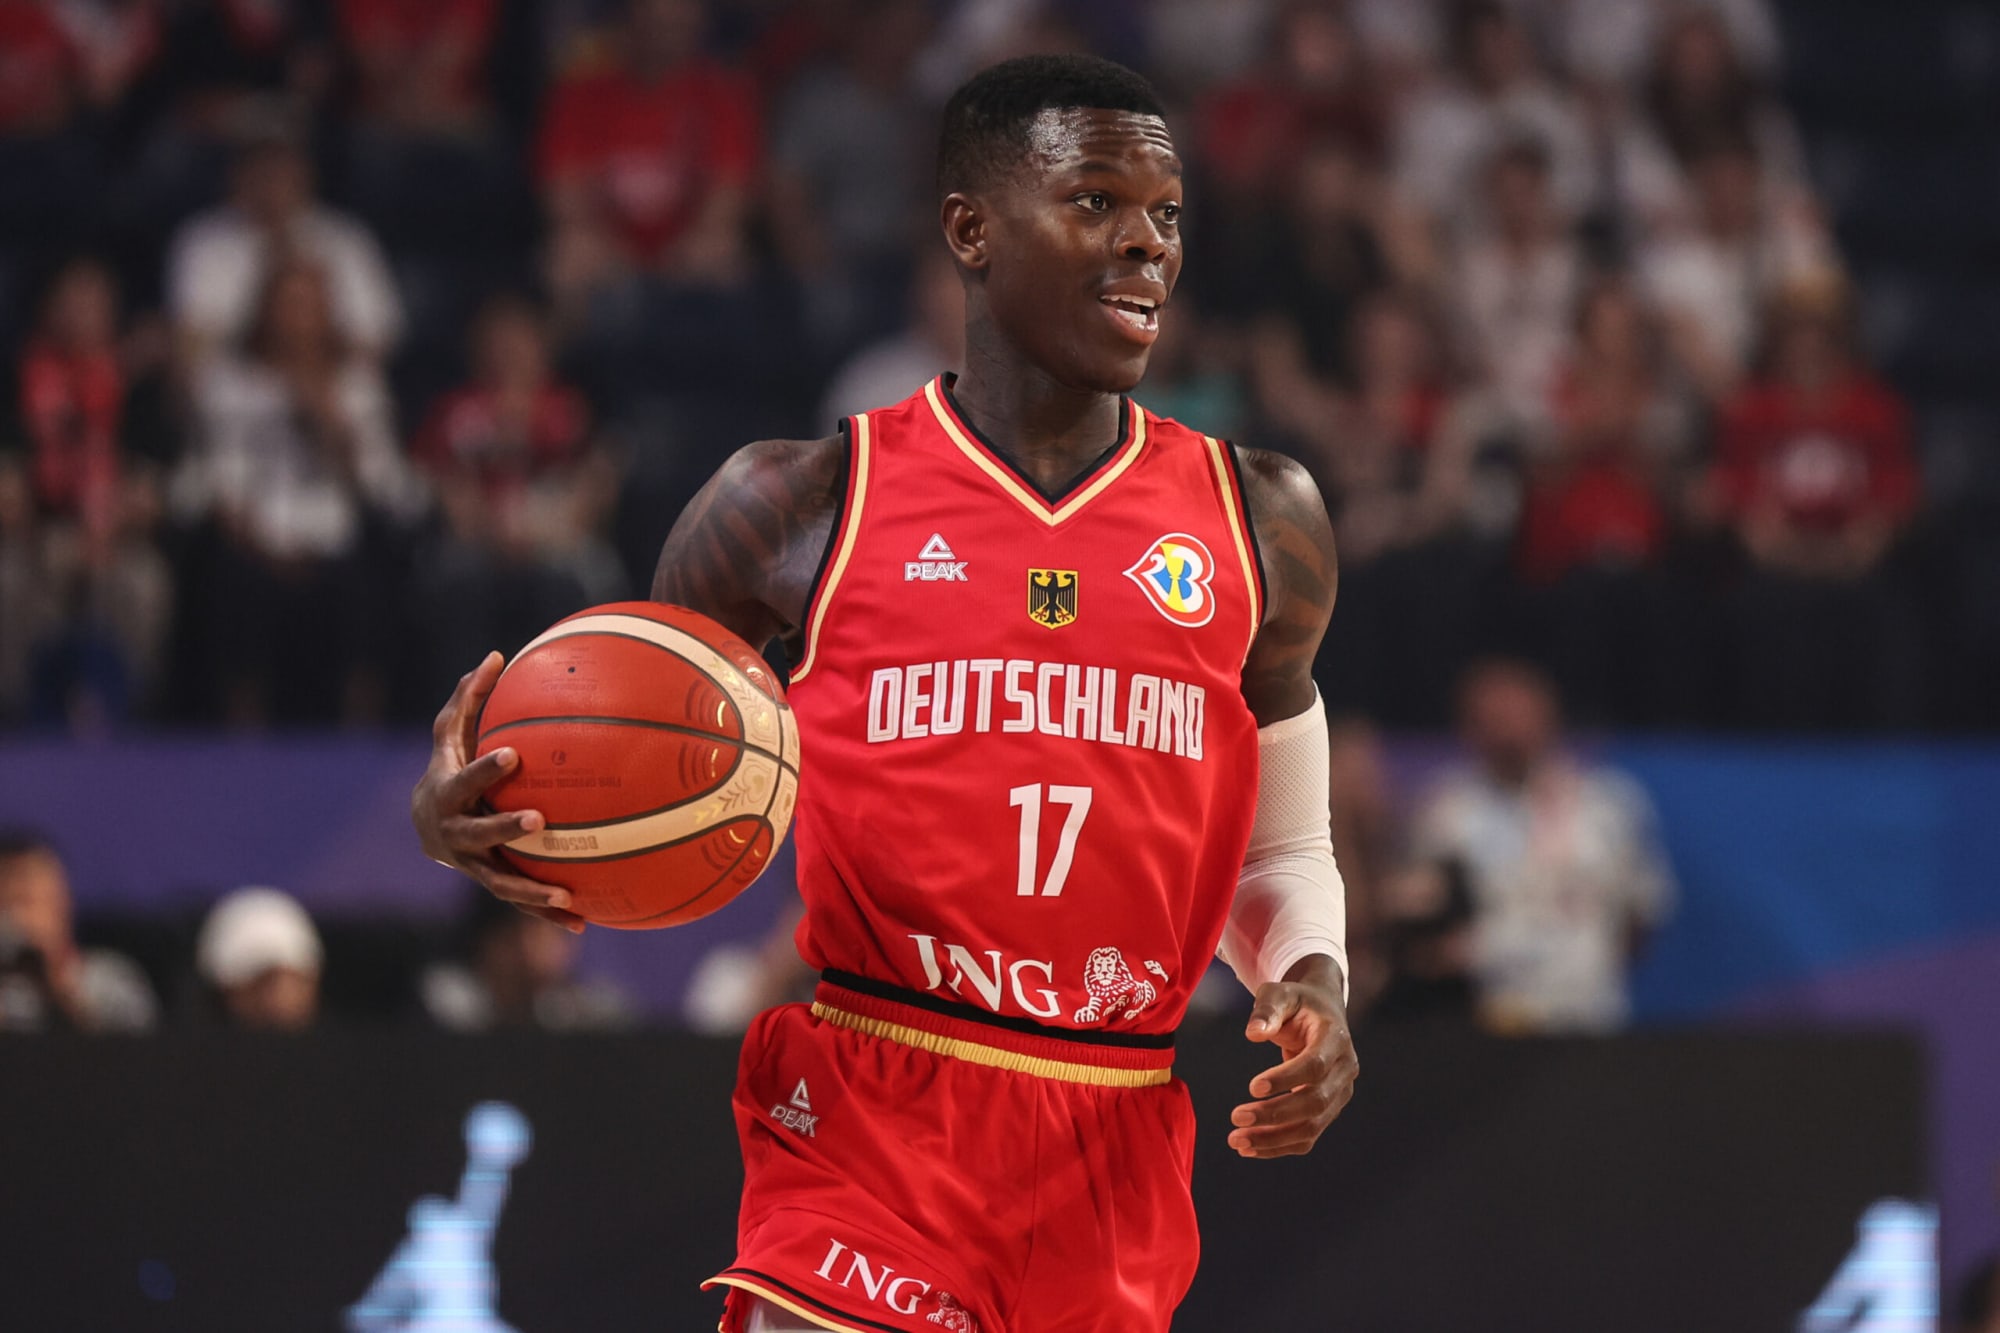 Dennis Schroder wearing a red jersey while holding basketball